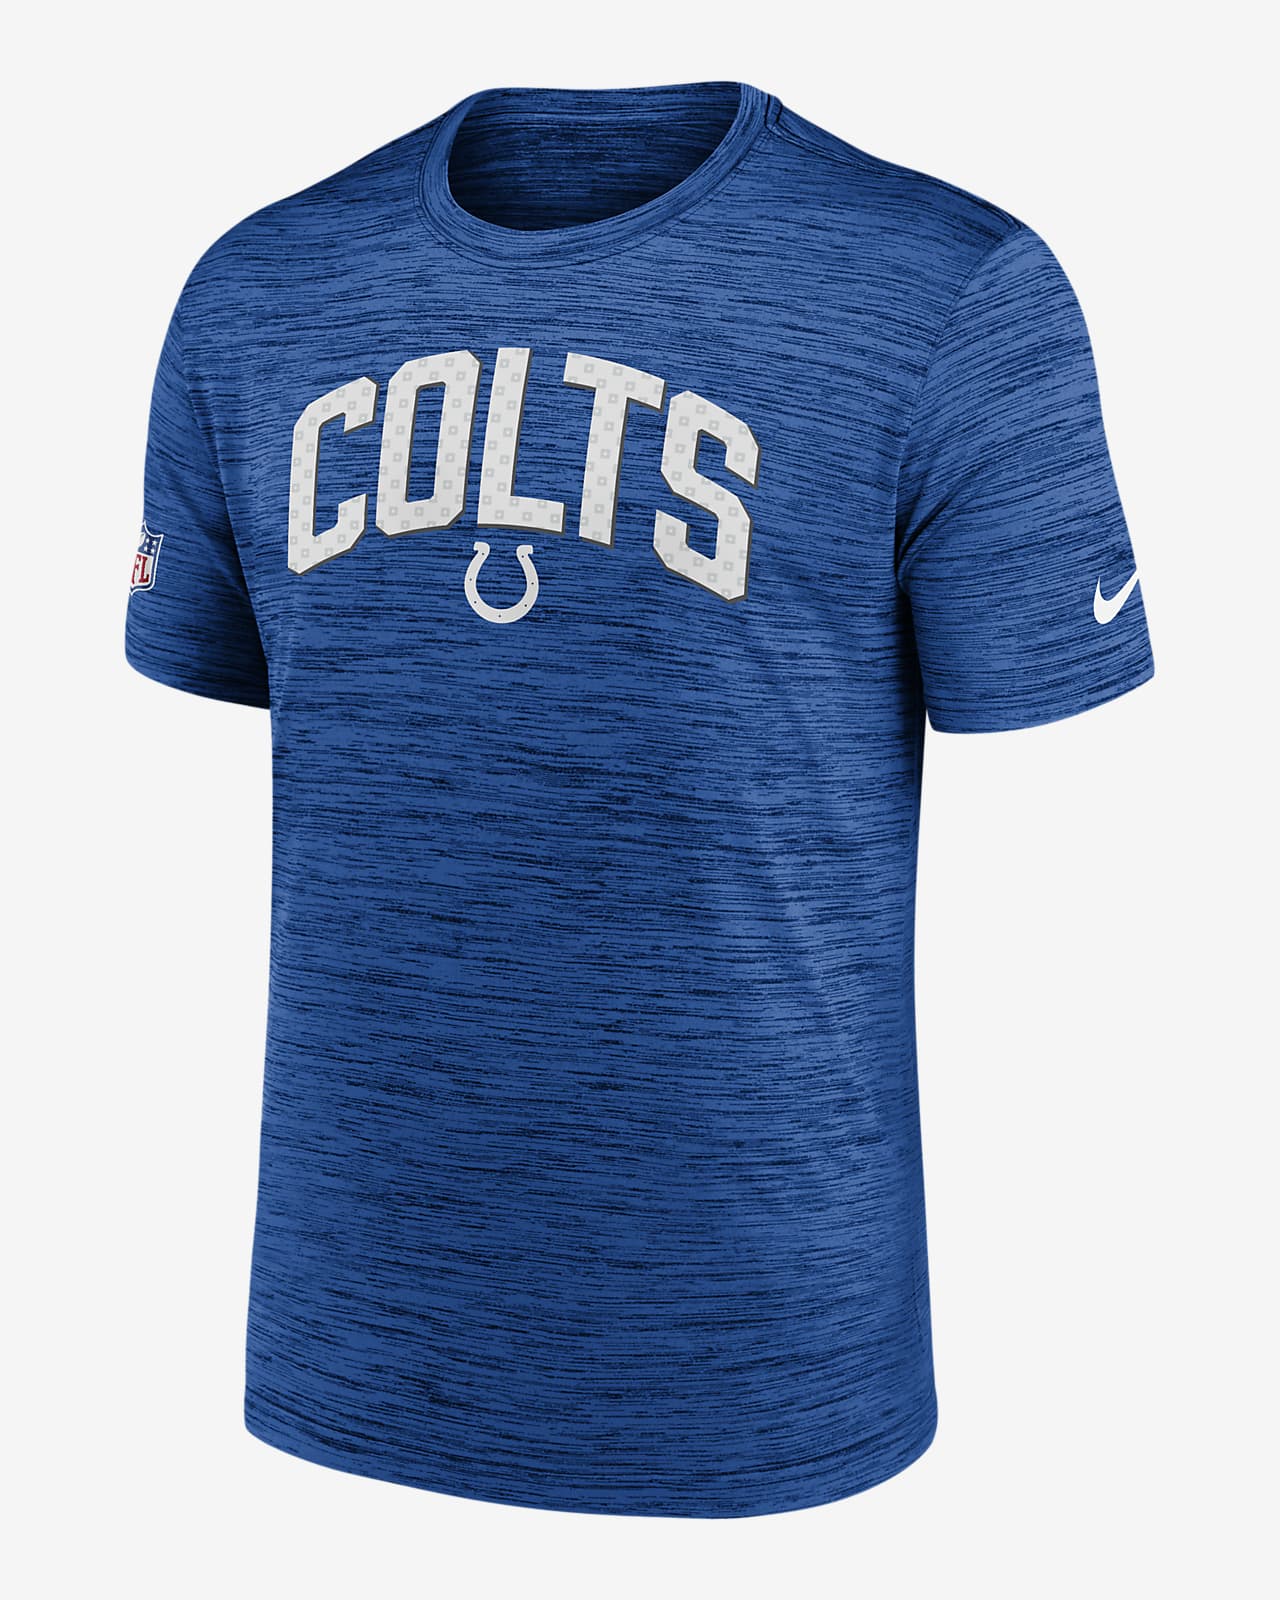 Nike Dri-FIT Velocity Athletic Stack (NFL Indianapolis Colts) Men's T-Shirt